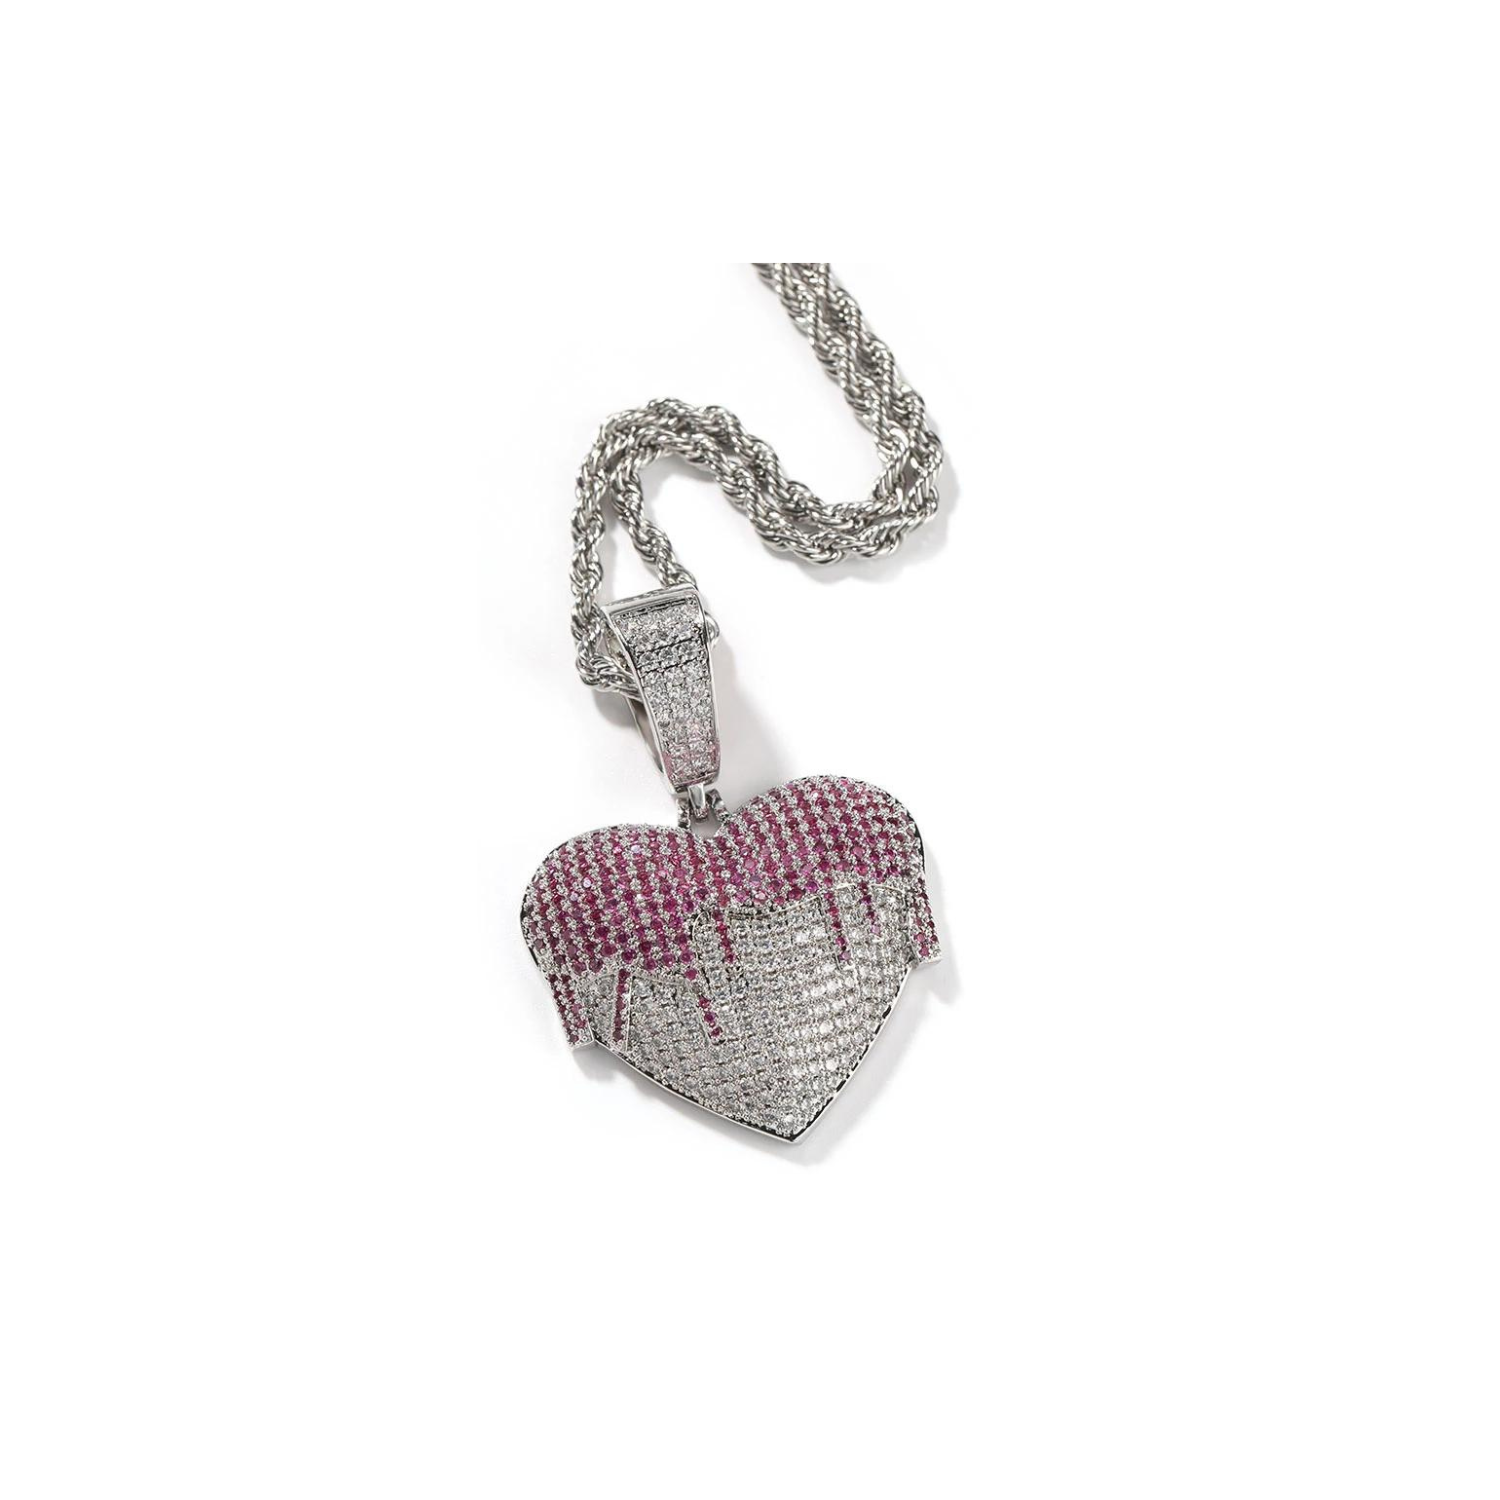 The Love Pendant - Bailey B’s Beauty & Accessories 